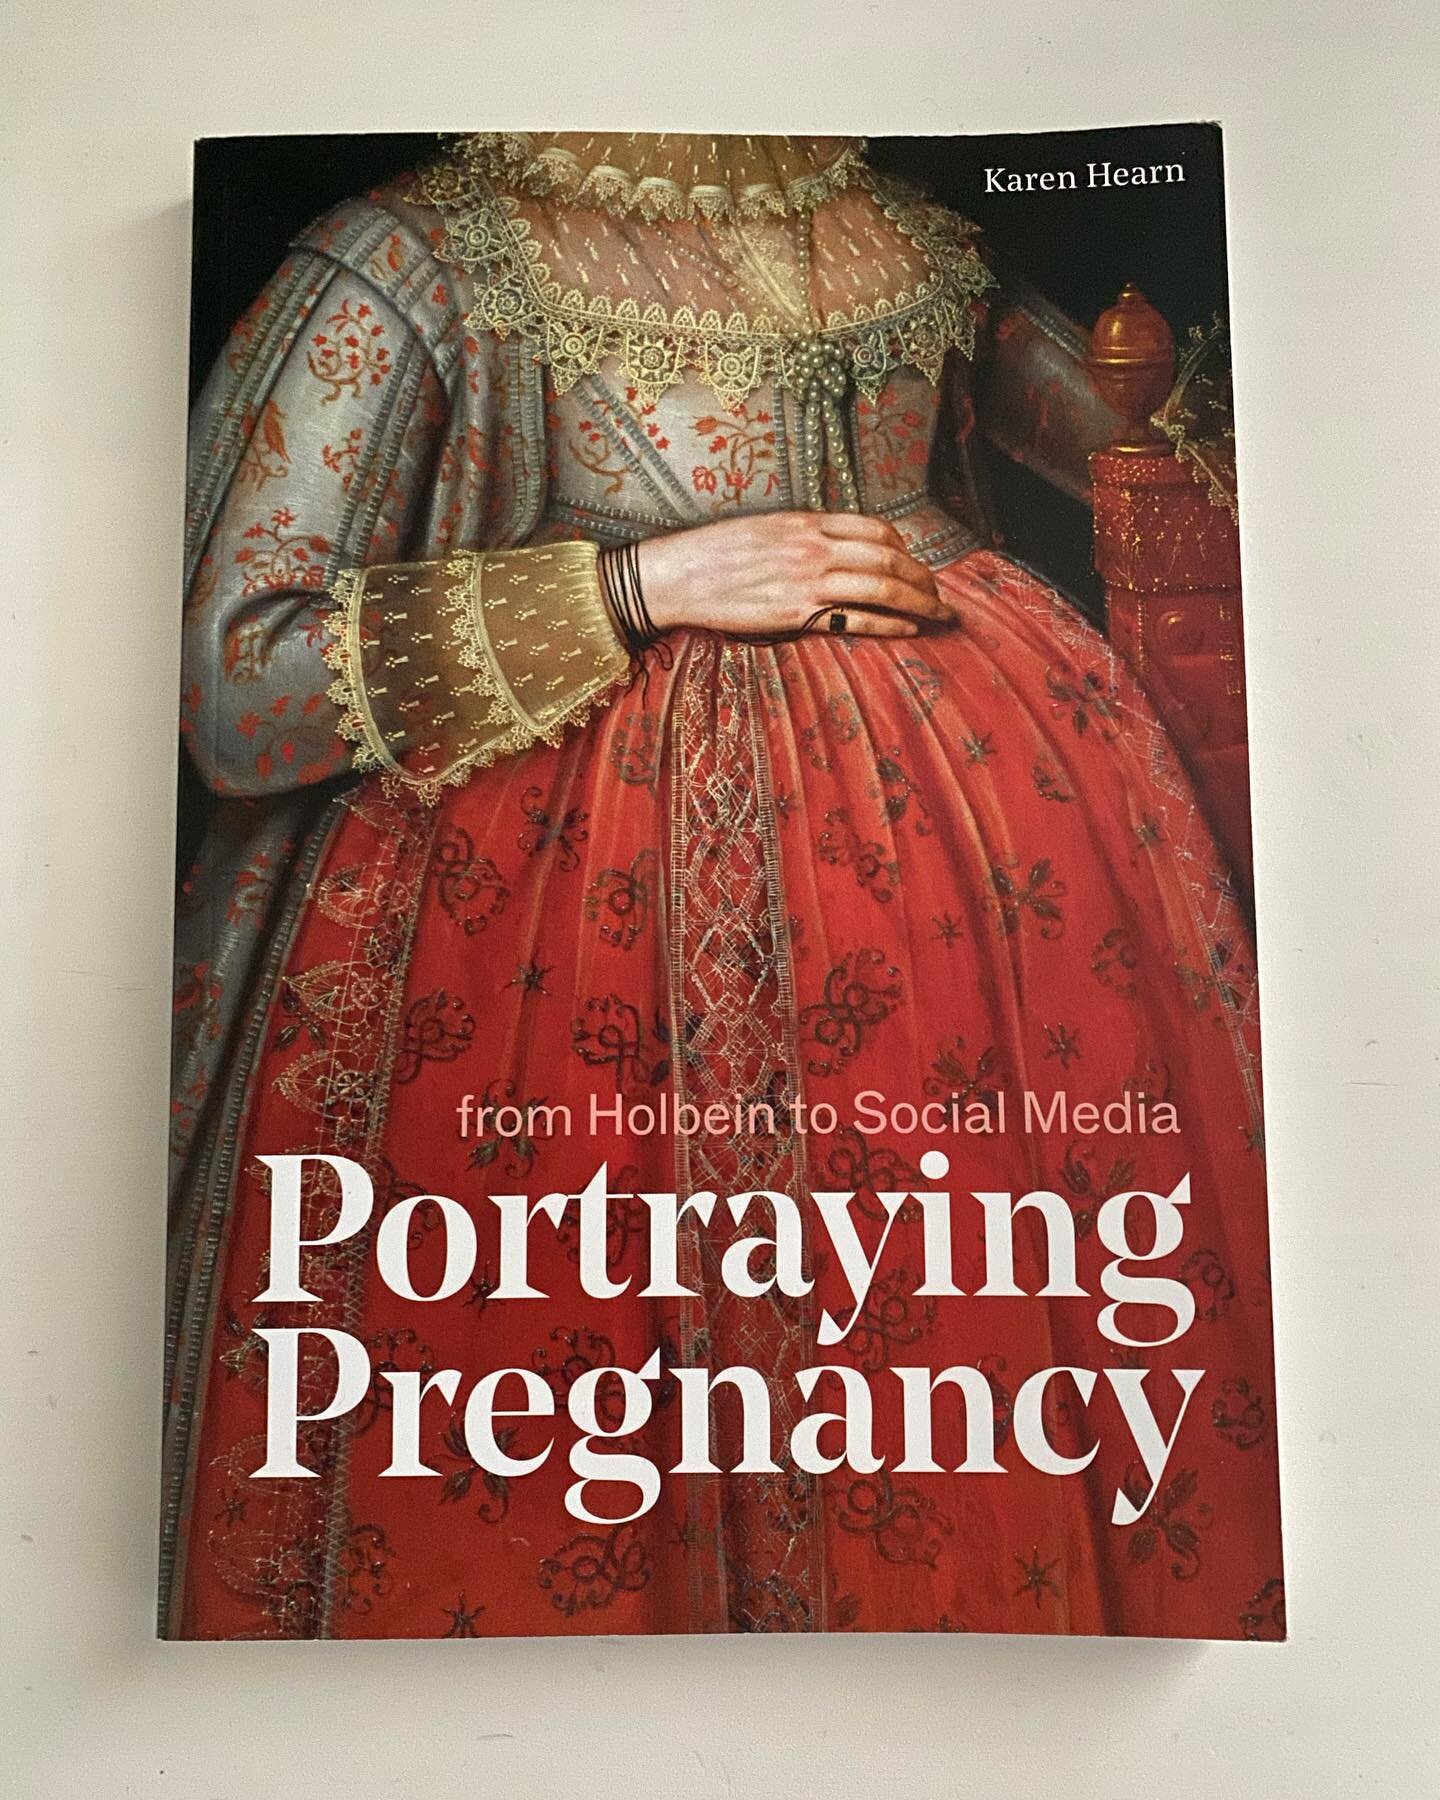 Exciting book delivery waiting for me when I got home. Karen Hearn&rsquo;s accompanying catalogue for the exhibition at The Foundling Museum. 58 intriguing images of the pregnant body from 15th century religious imagery to Serena Williams on Vanity F